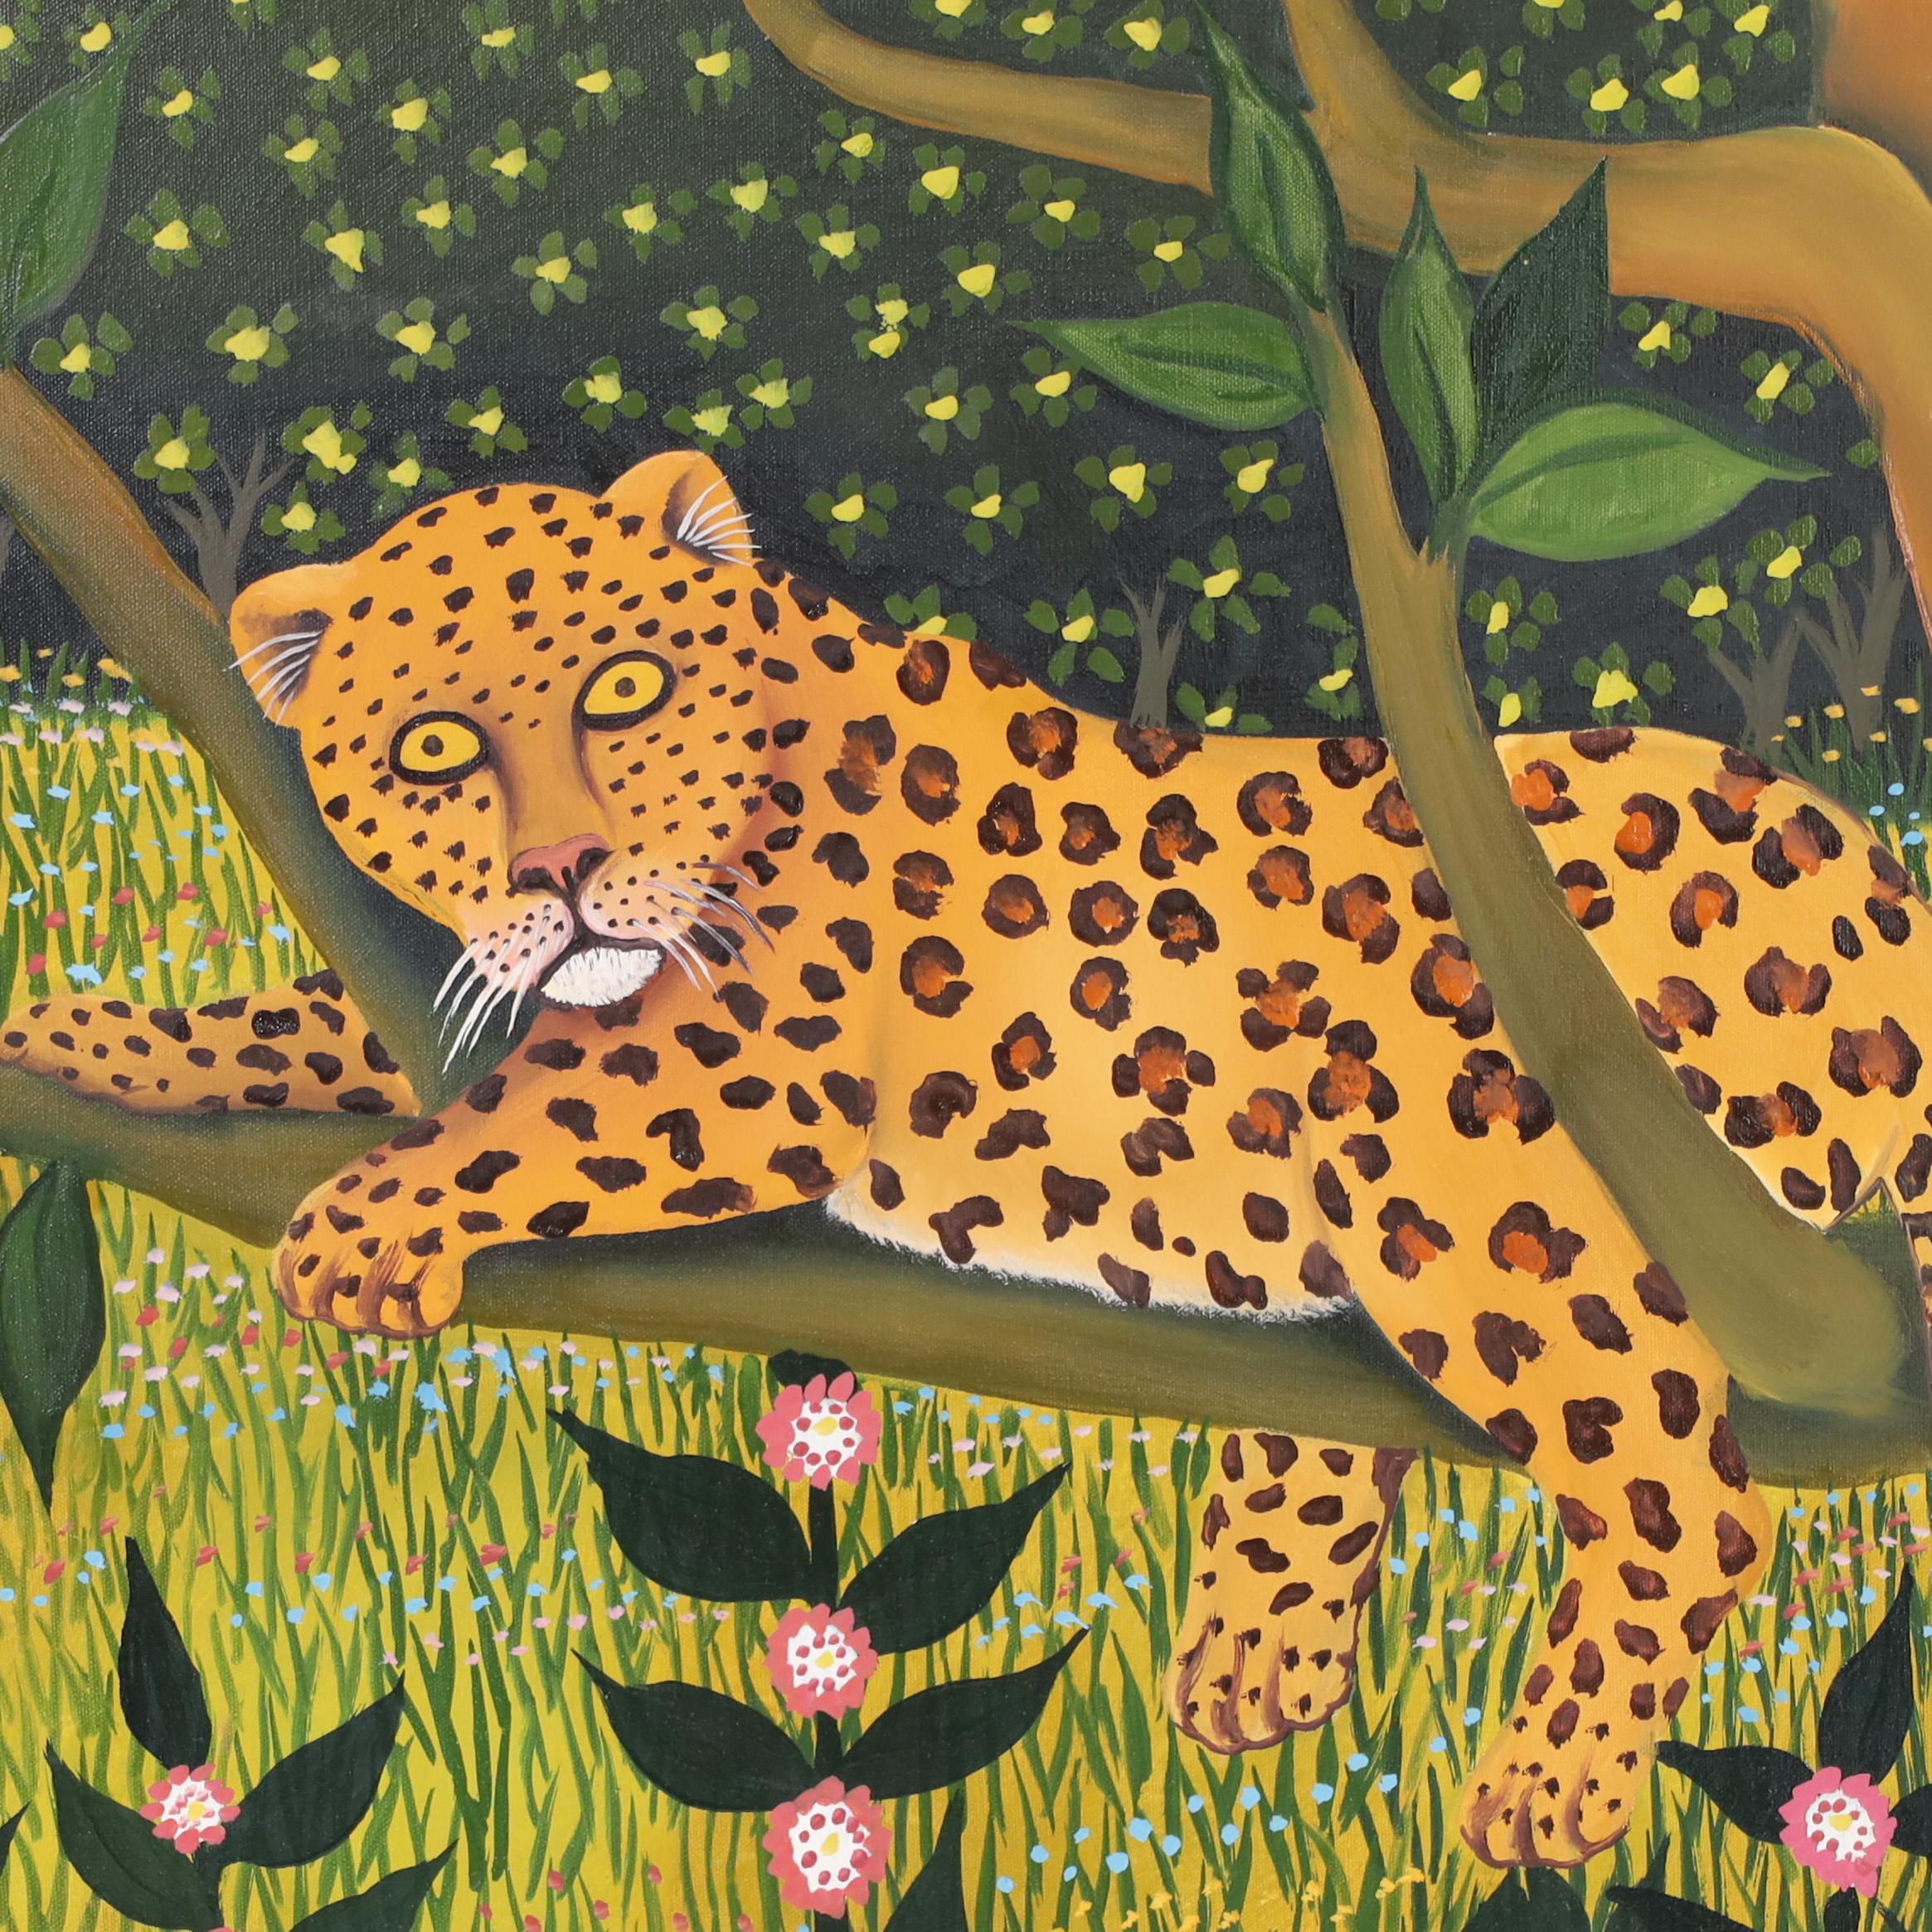 Hand-Painted Vintage Painting on Canvas of a Leopard and Parrot in a Jungle Setting For Sale